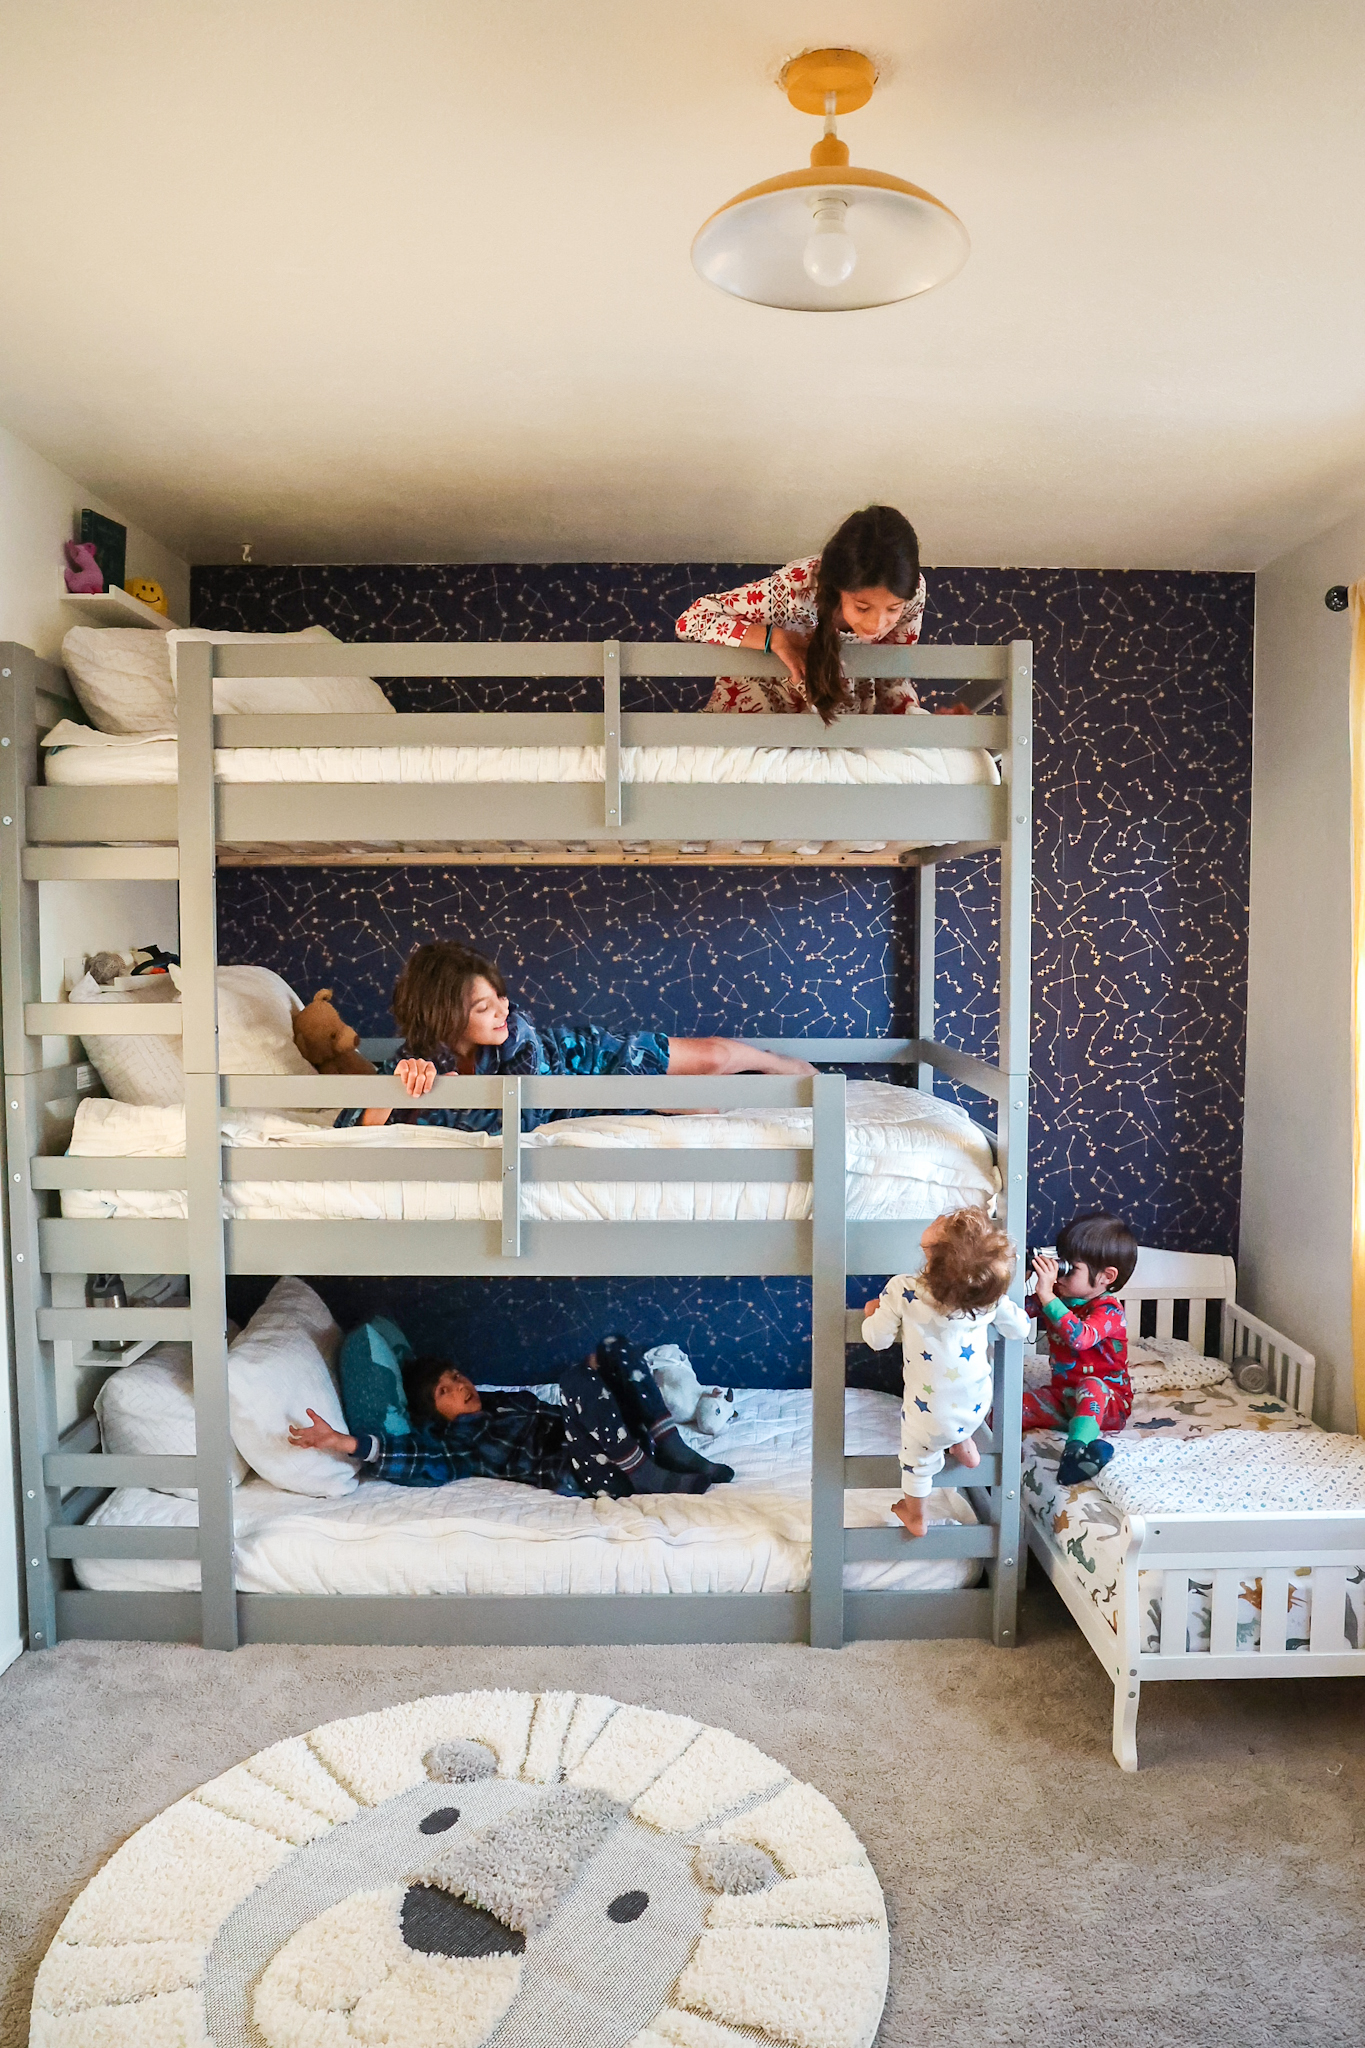 Our Kids Triple Bunk Room Local, Triple Bunk Beds For Kids